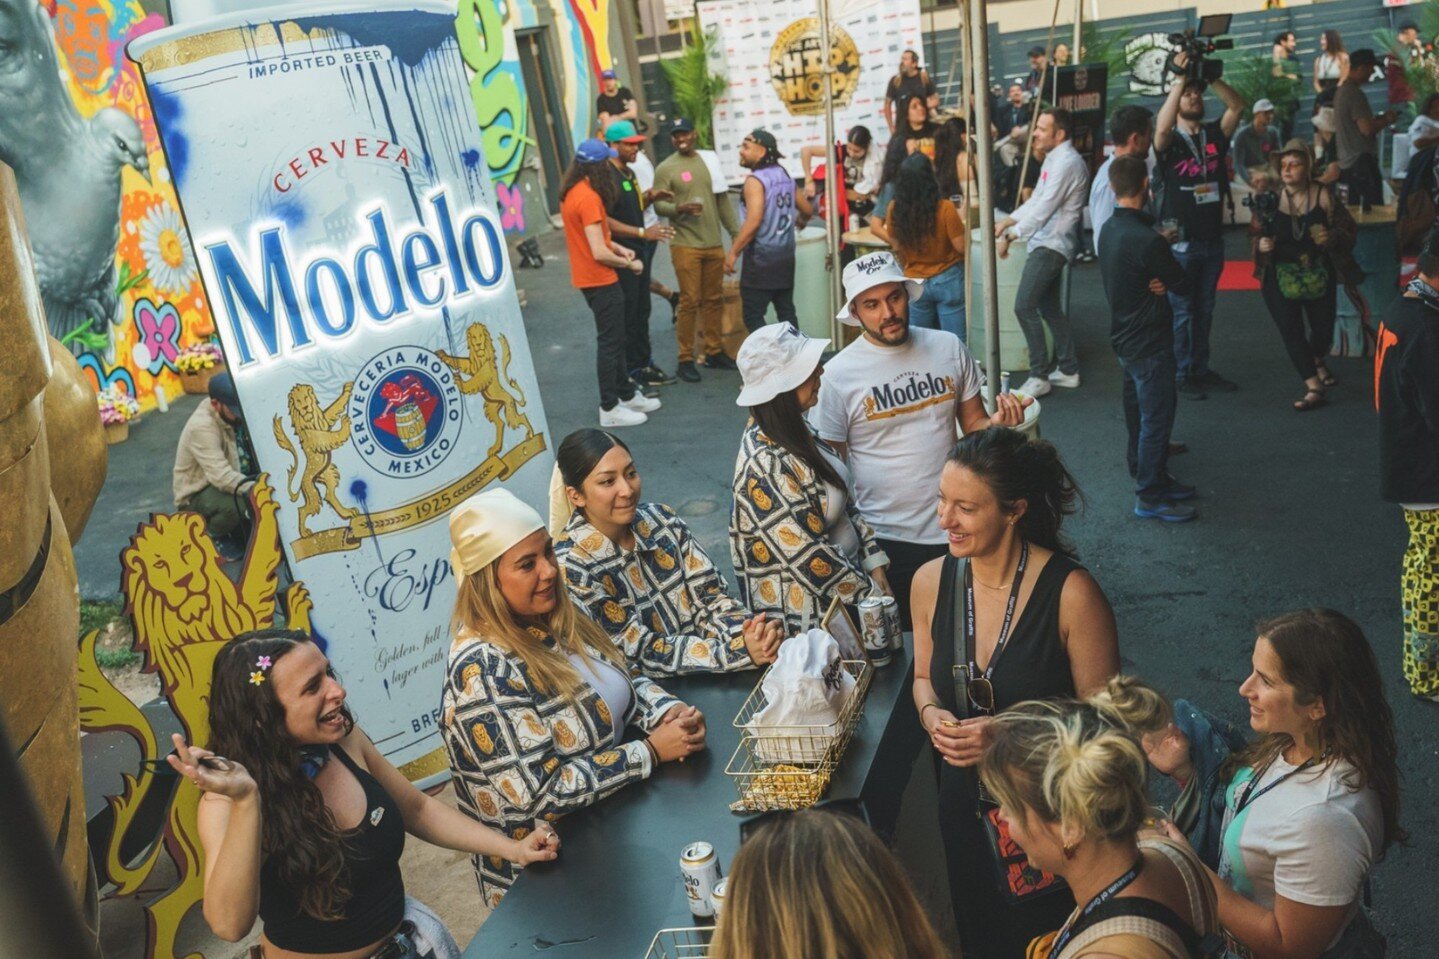 @ModeloUSA, in partnership with @cogentworld, sponsored 'The Art of Hip Hop' pop-up by @museumofgraffiti in Austin TX. Exclusive art drops were made available for purchase and Modelo Oro could be sampled, alongside original programming during the @SX